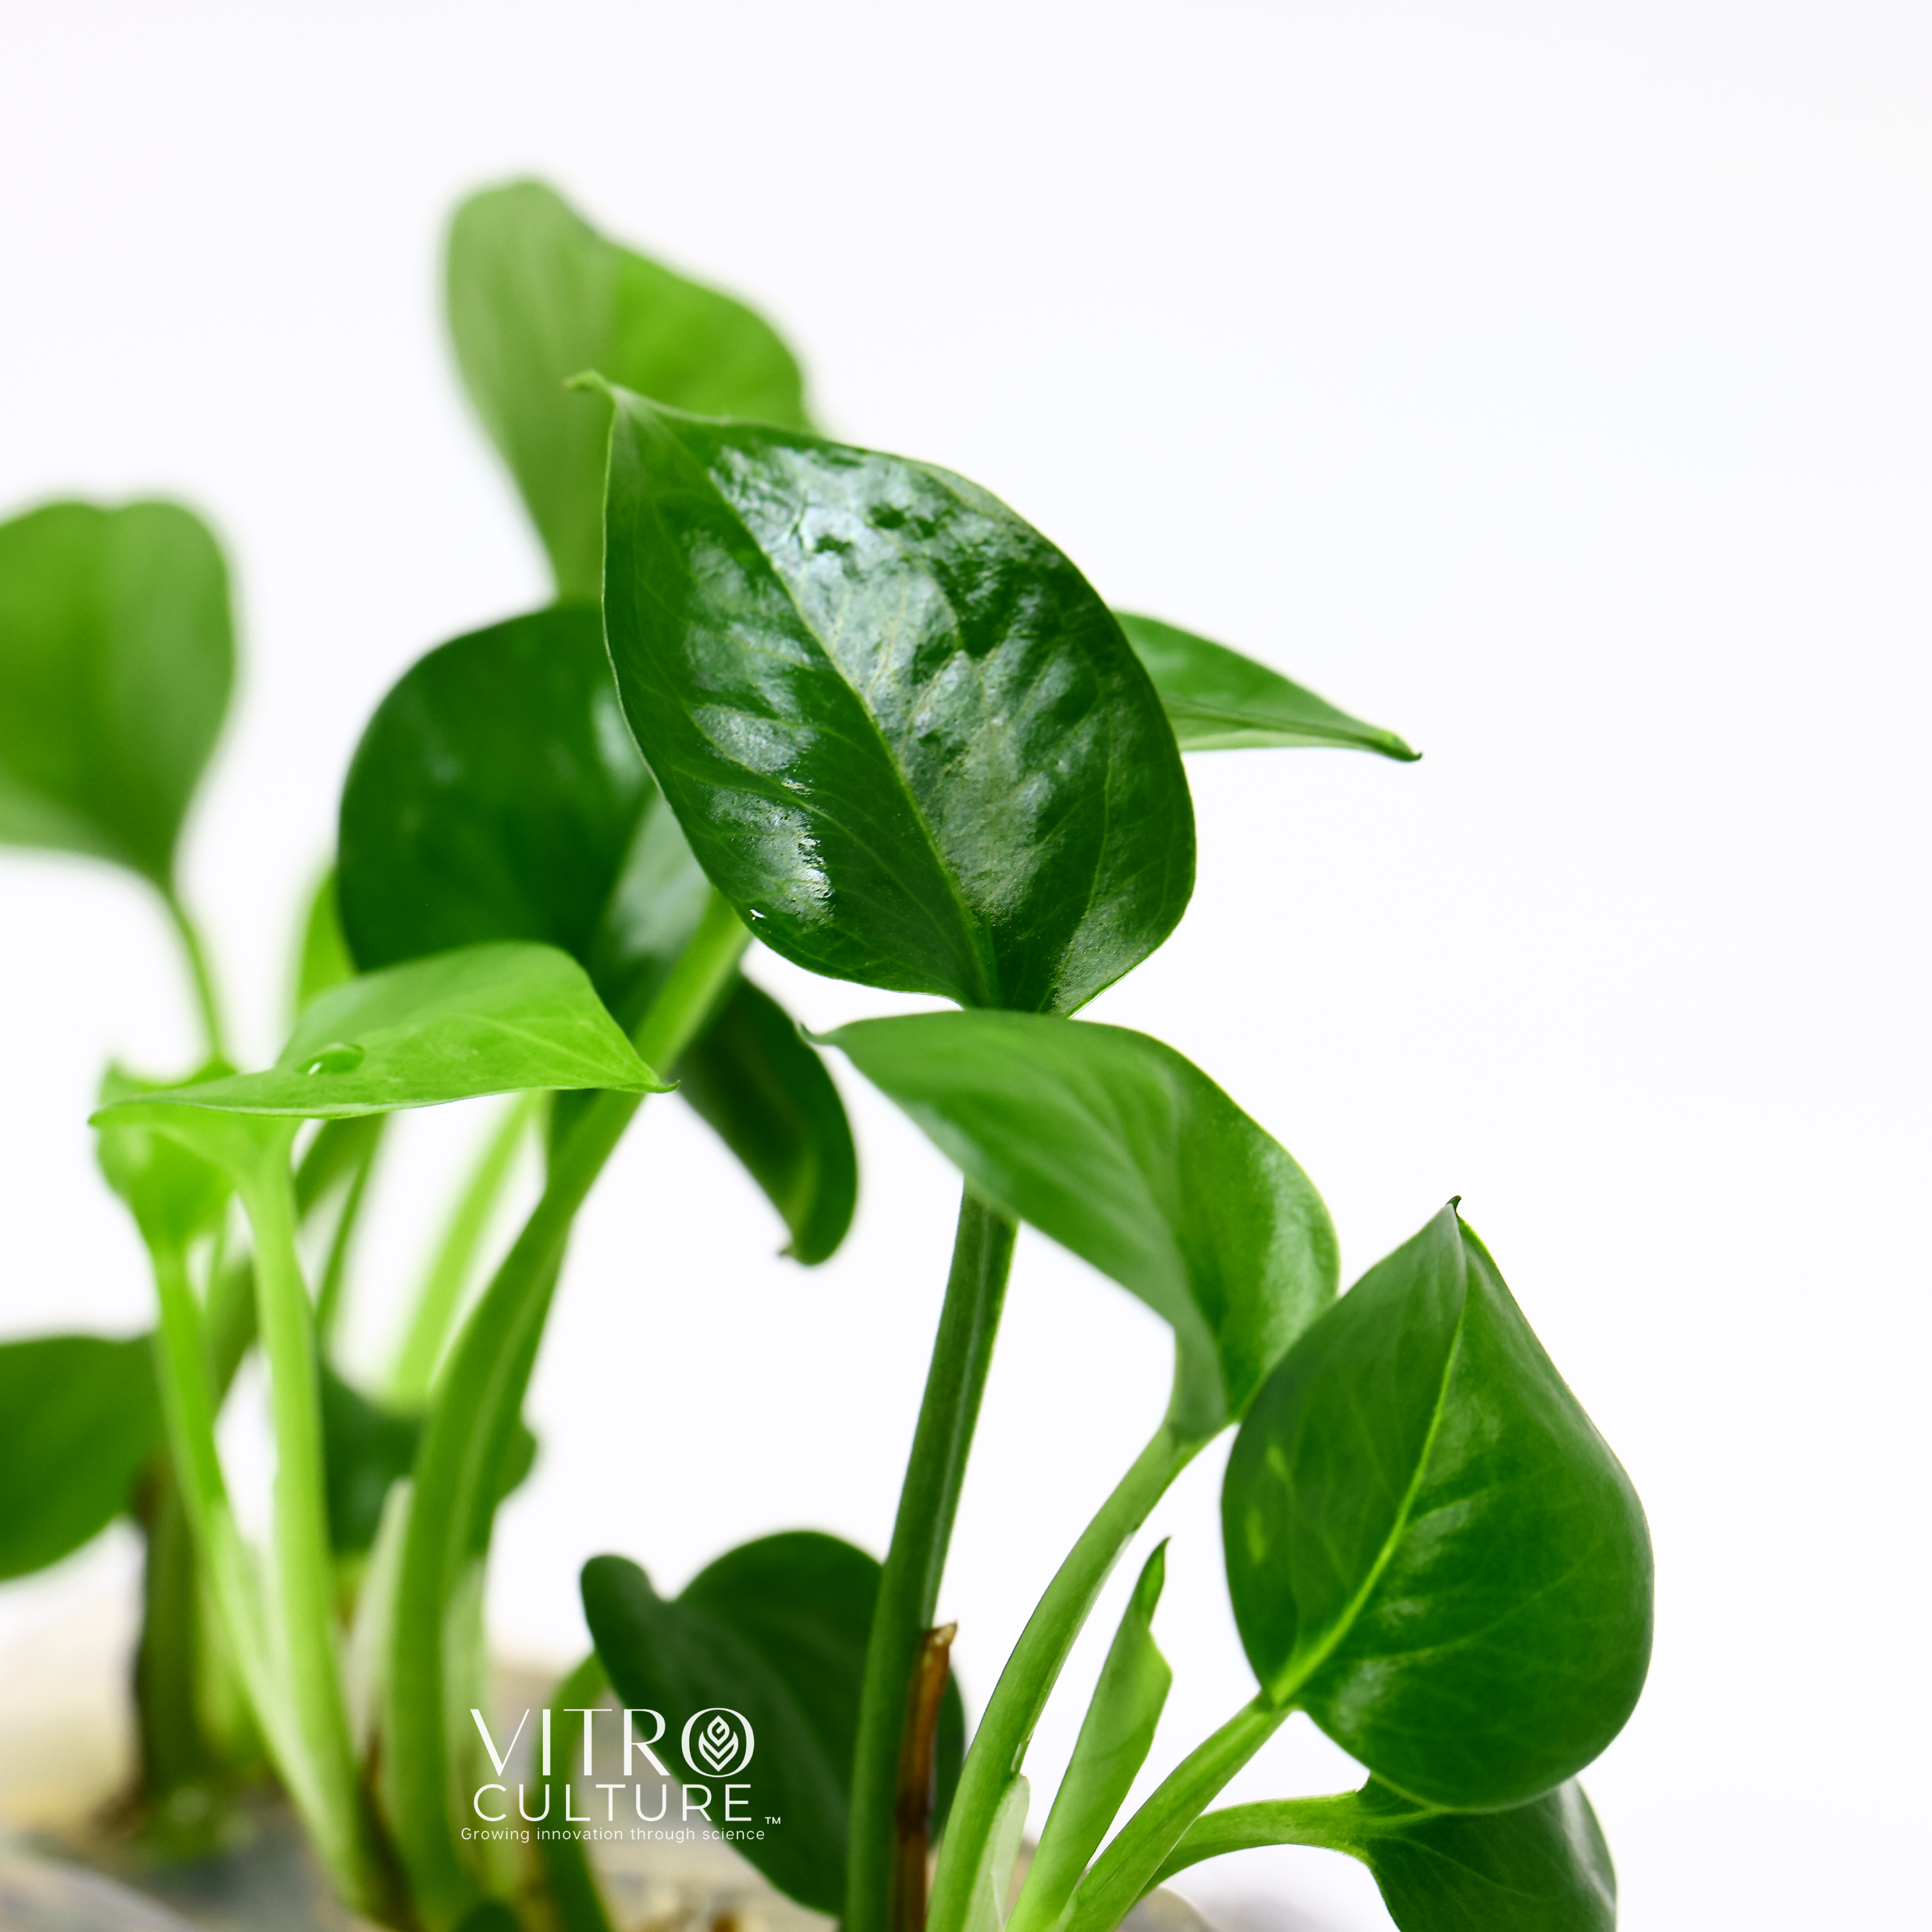 The leaves of jade pothos are typically heart-shaped and a vibrant shade of green. The plant can grow up to several feet long and is often grown as a trailing vine, making it a great choice for hanging baskets or training up a trellis or support.